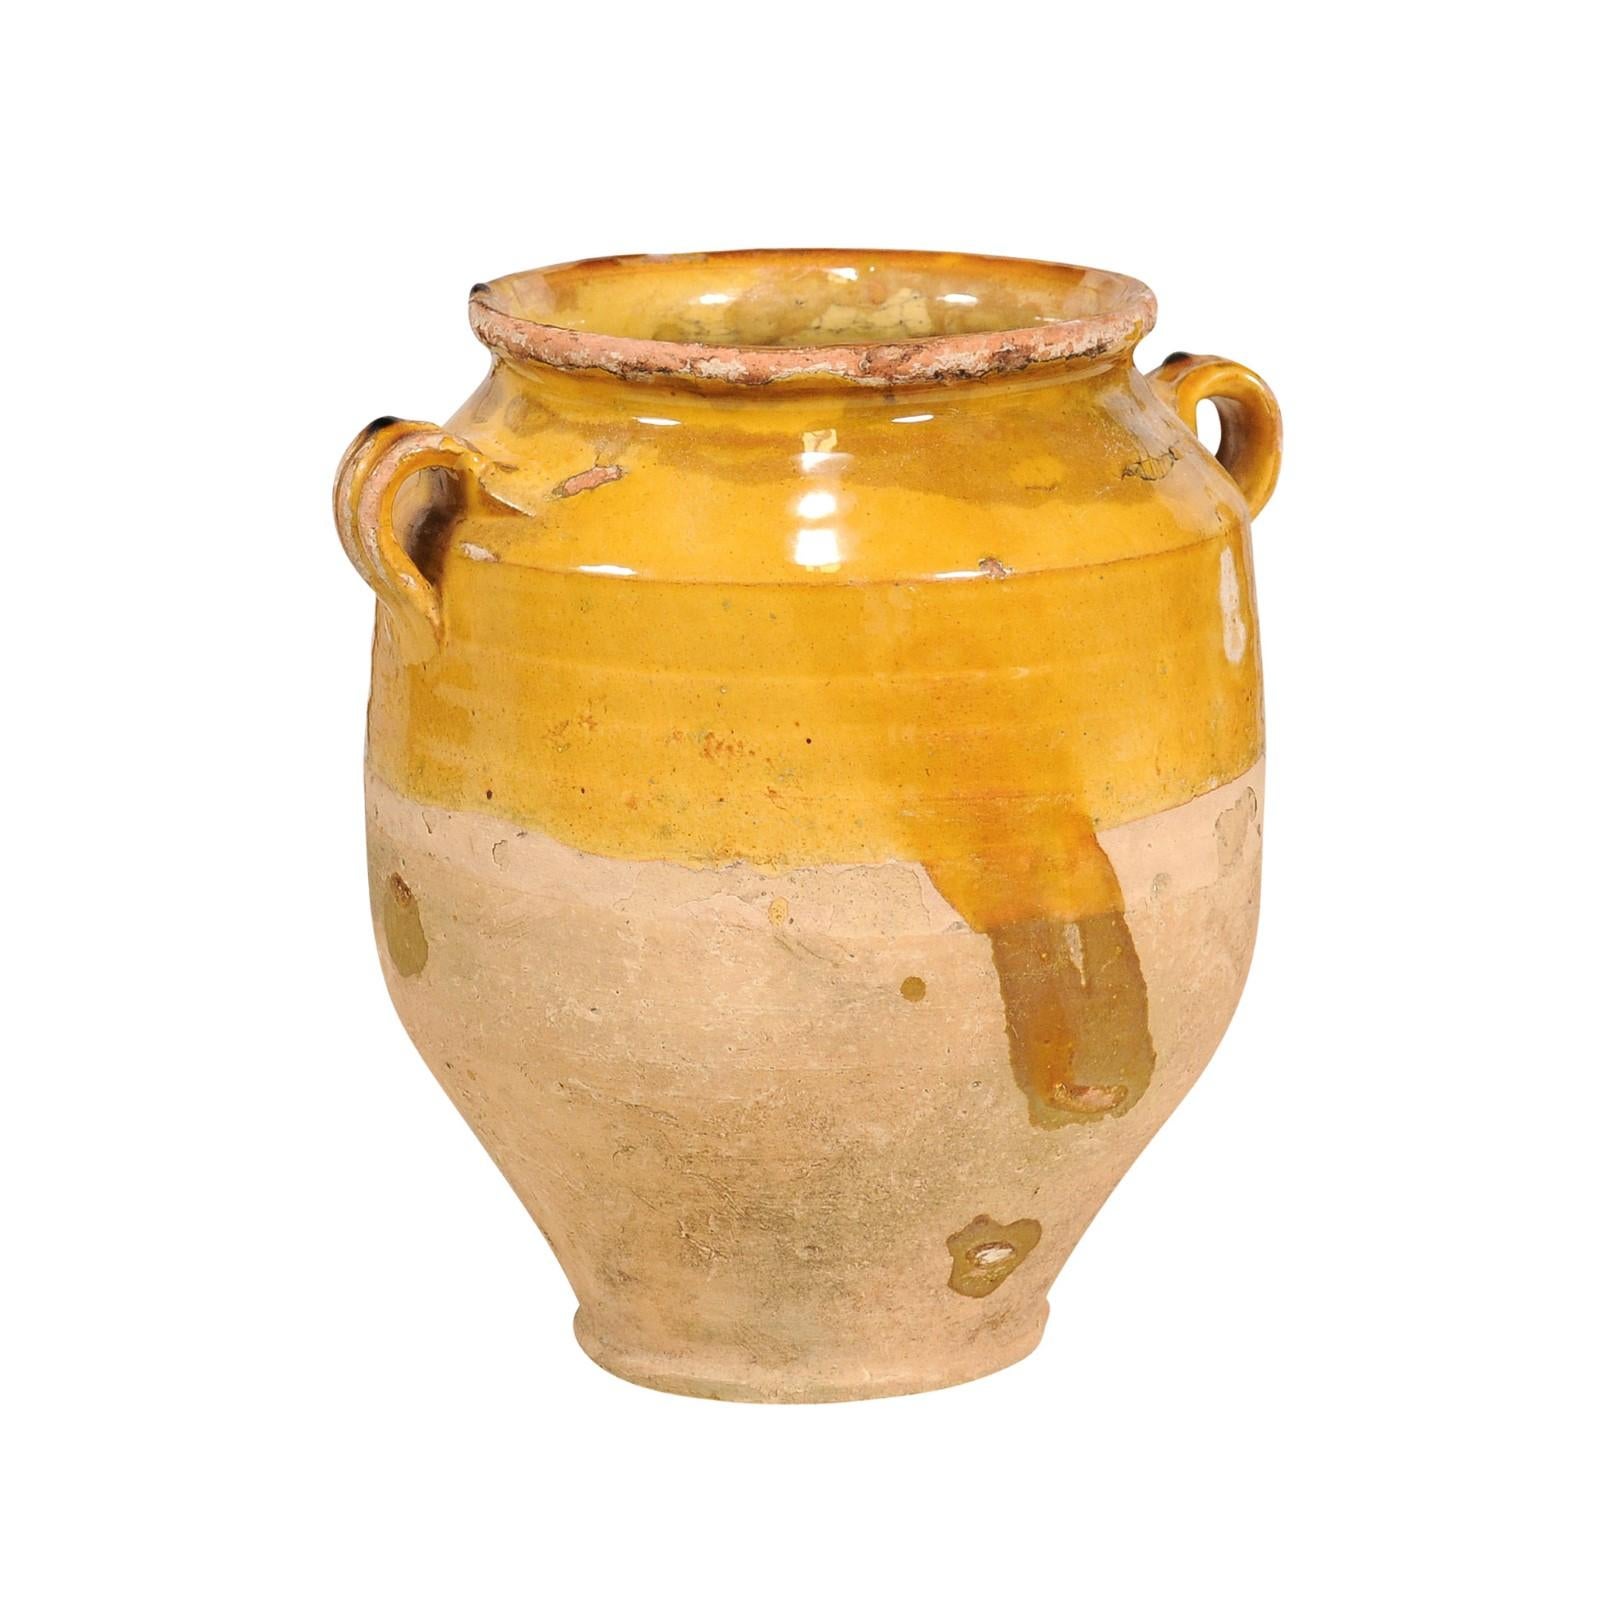 A rustic French Provincial pot à confit from the 19th century with yellow glaze and double handles. Embrace the essence of rustic French charm with this exquisite 19th-century French Provincial pot à confit, a piece steeped in history and character.